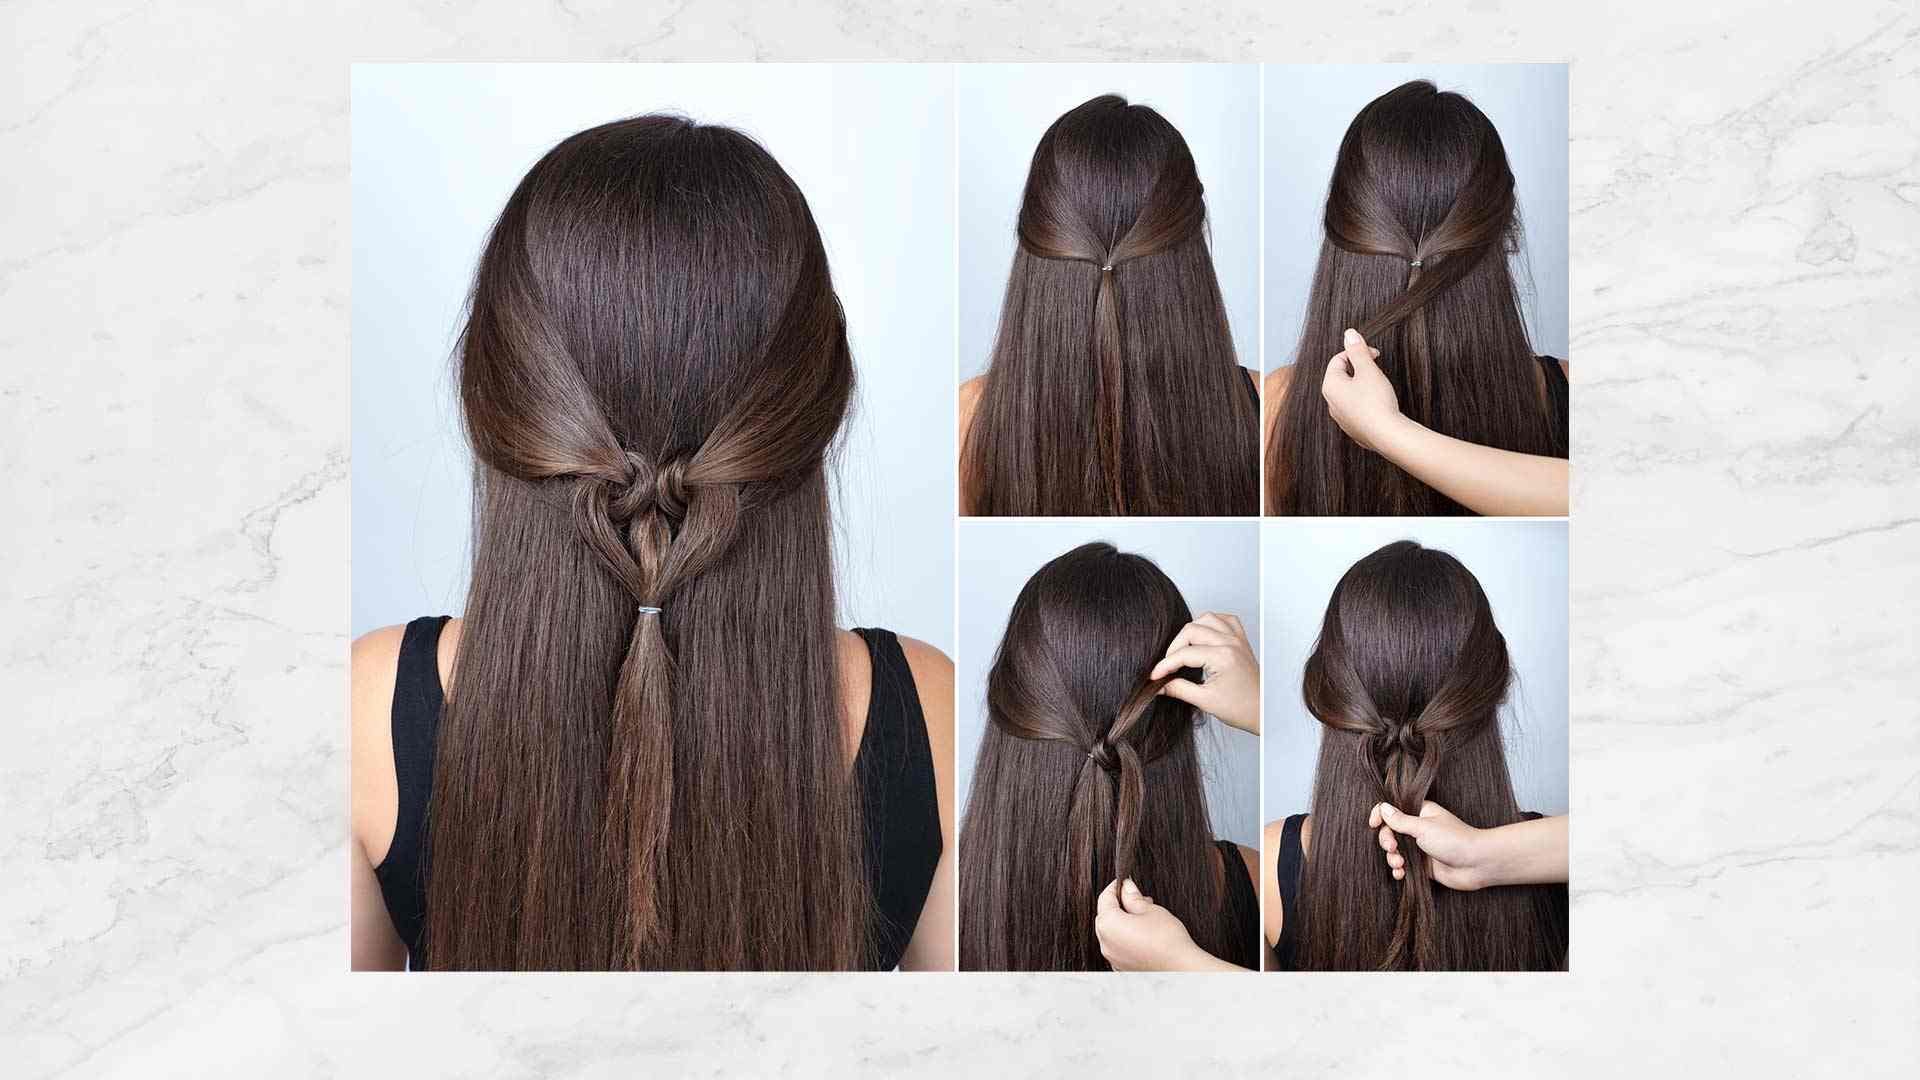 7 Super Easy Hairstyles for Girls Got You Covered for the Week  Stylish  Life for Moms